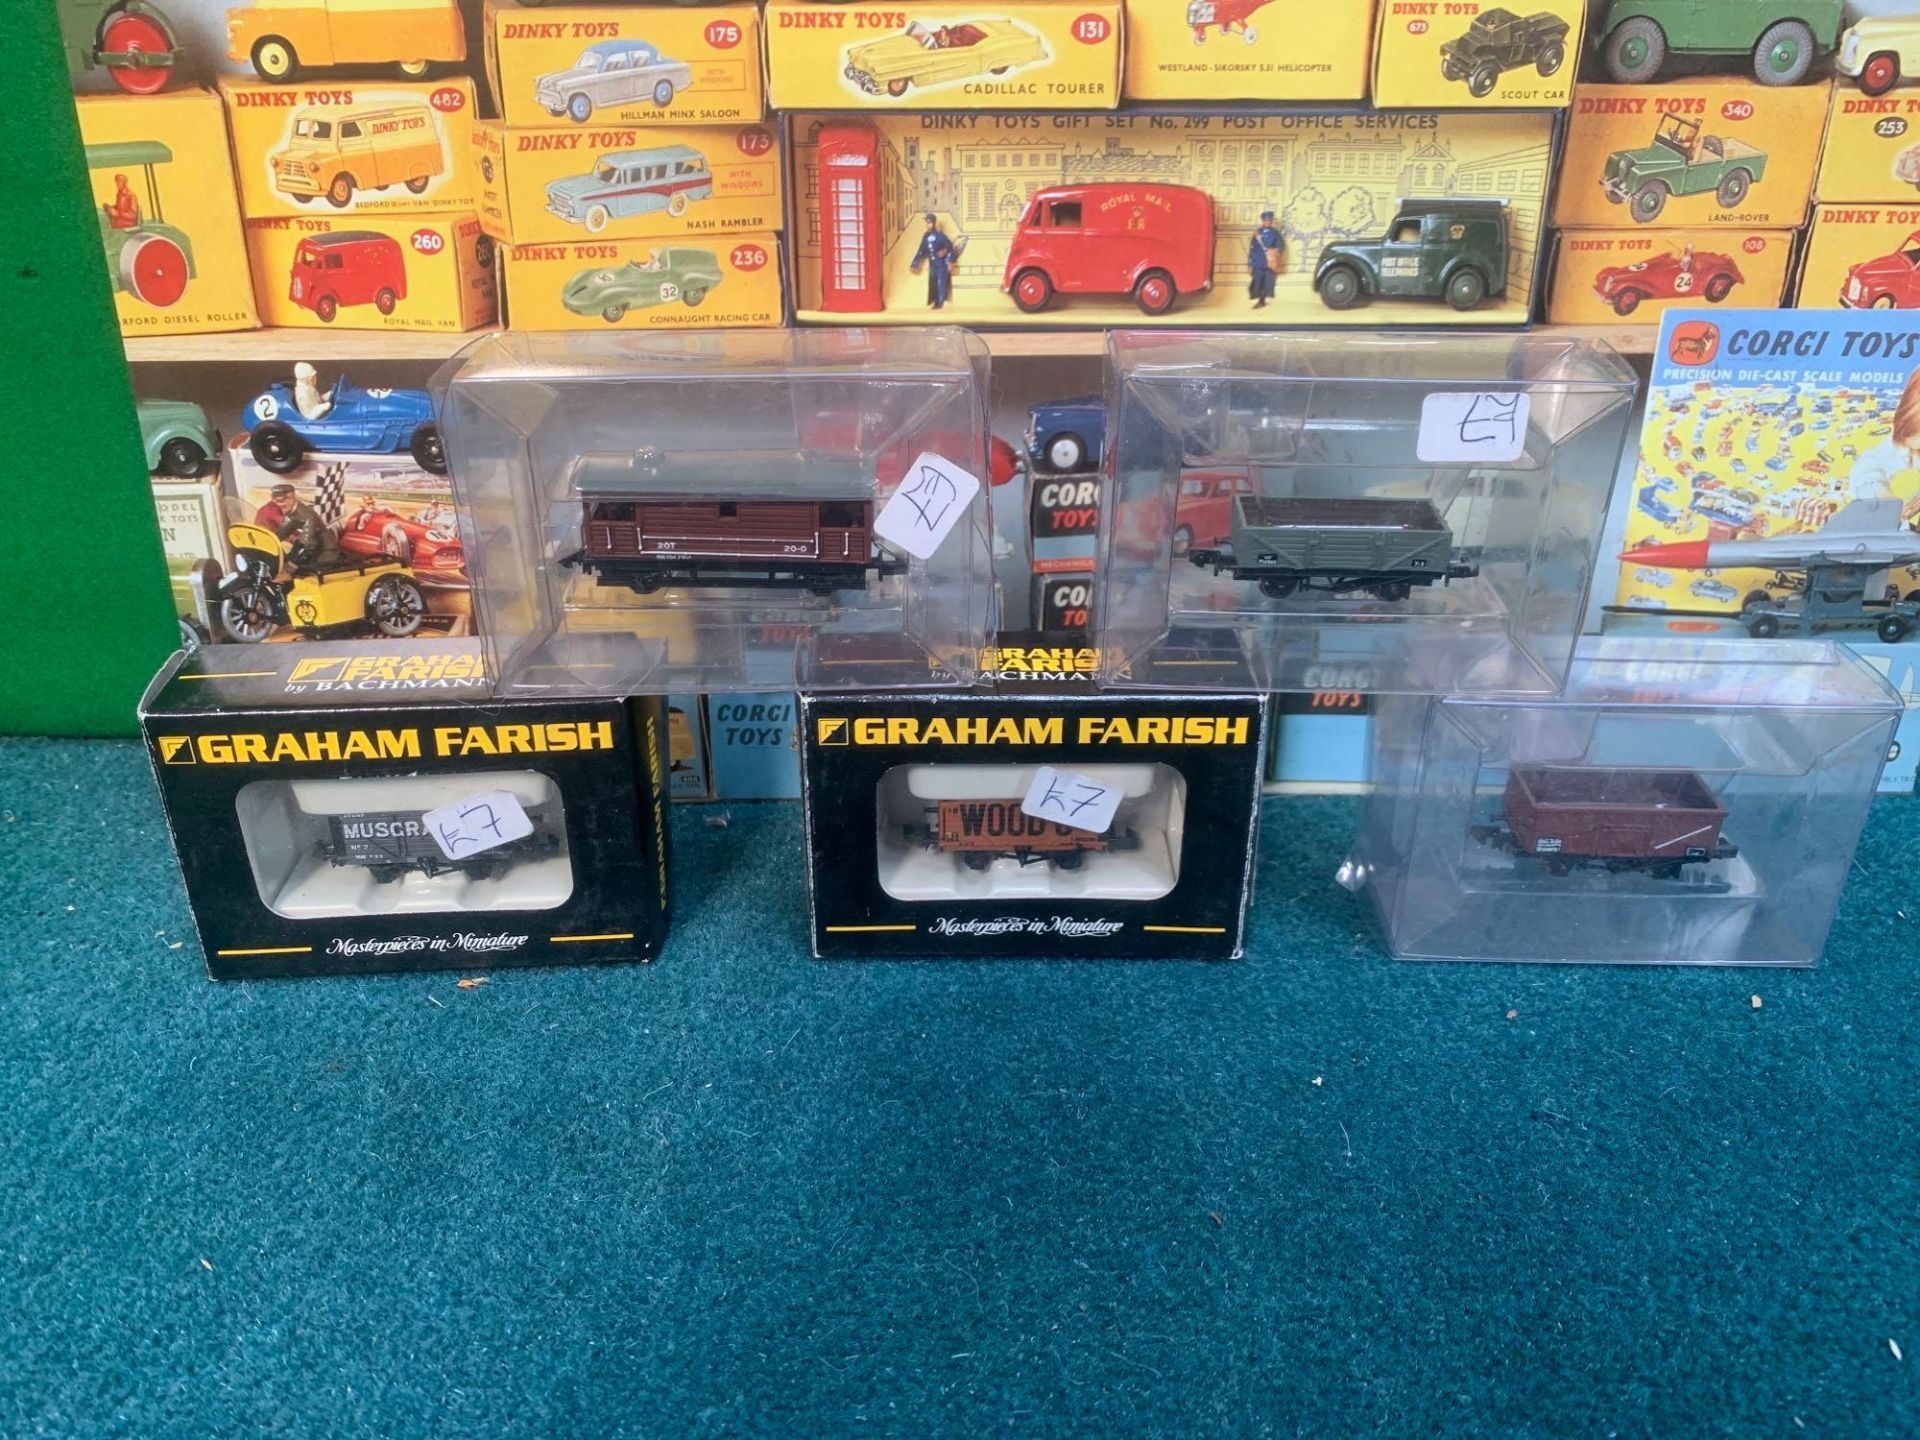 9 X Miniature Railway Models Includes Graham Farrish Models And PECO Models Carriageways Trains - Image 8 of 12